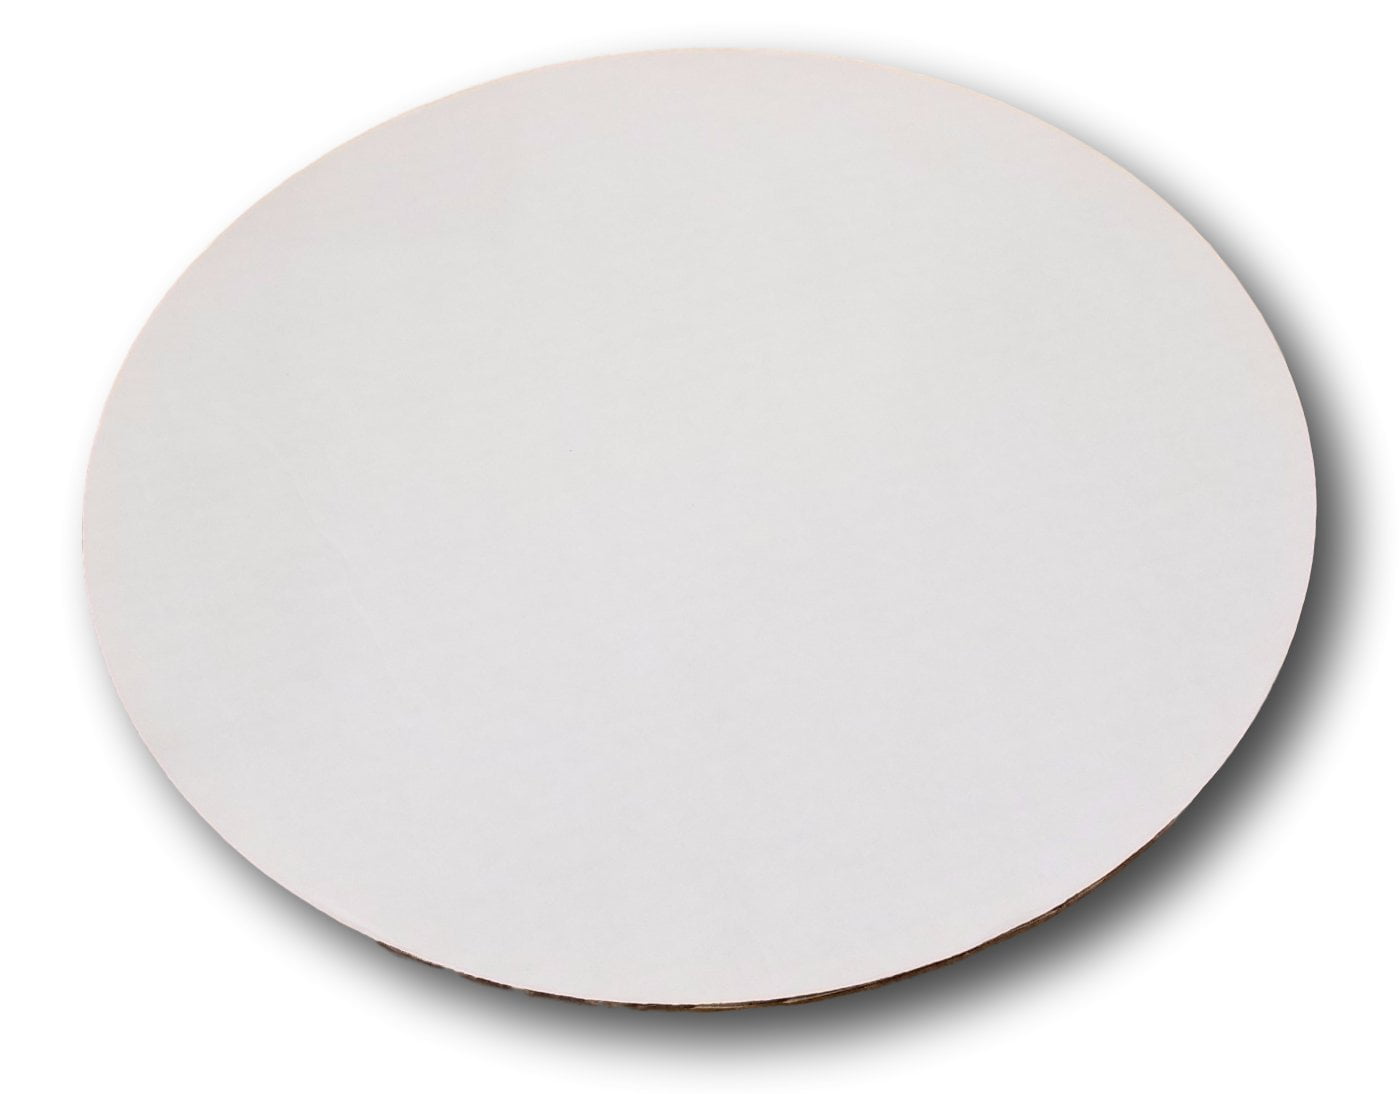 10" Corrugated Sturdy White Cake Pizza Circle by MT Products 15 Pieces 